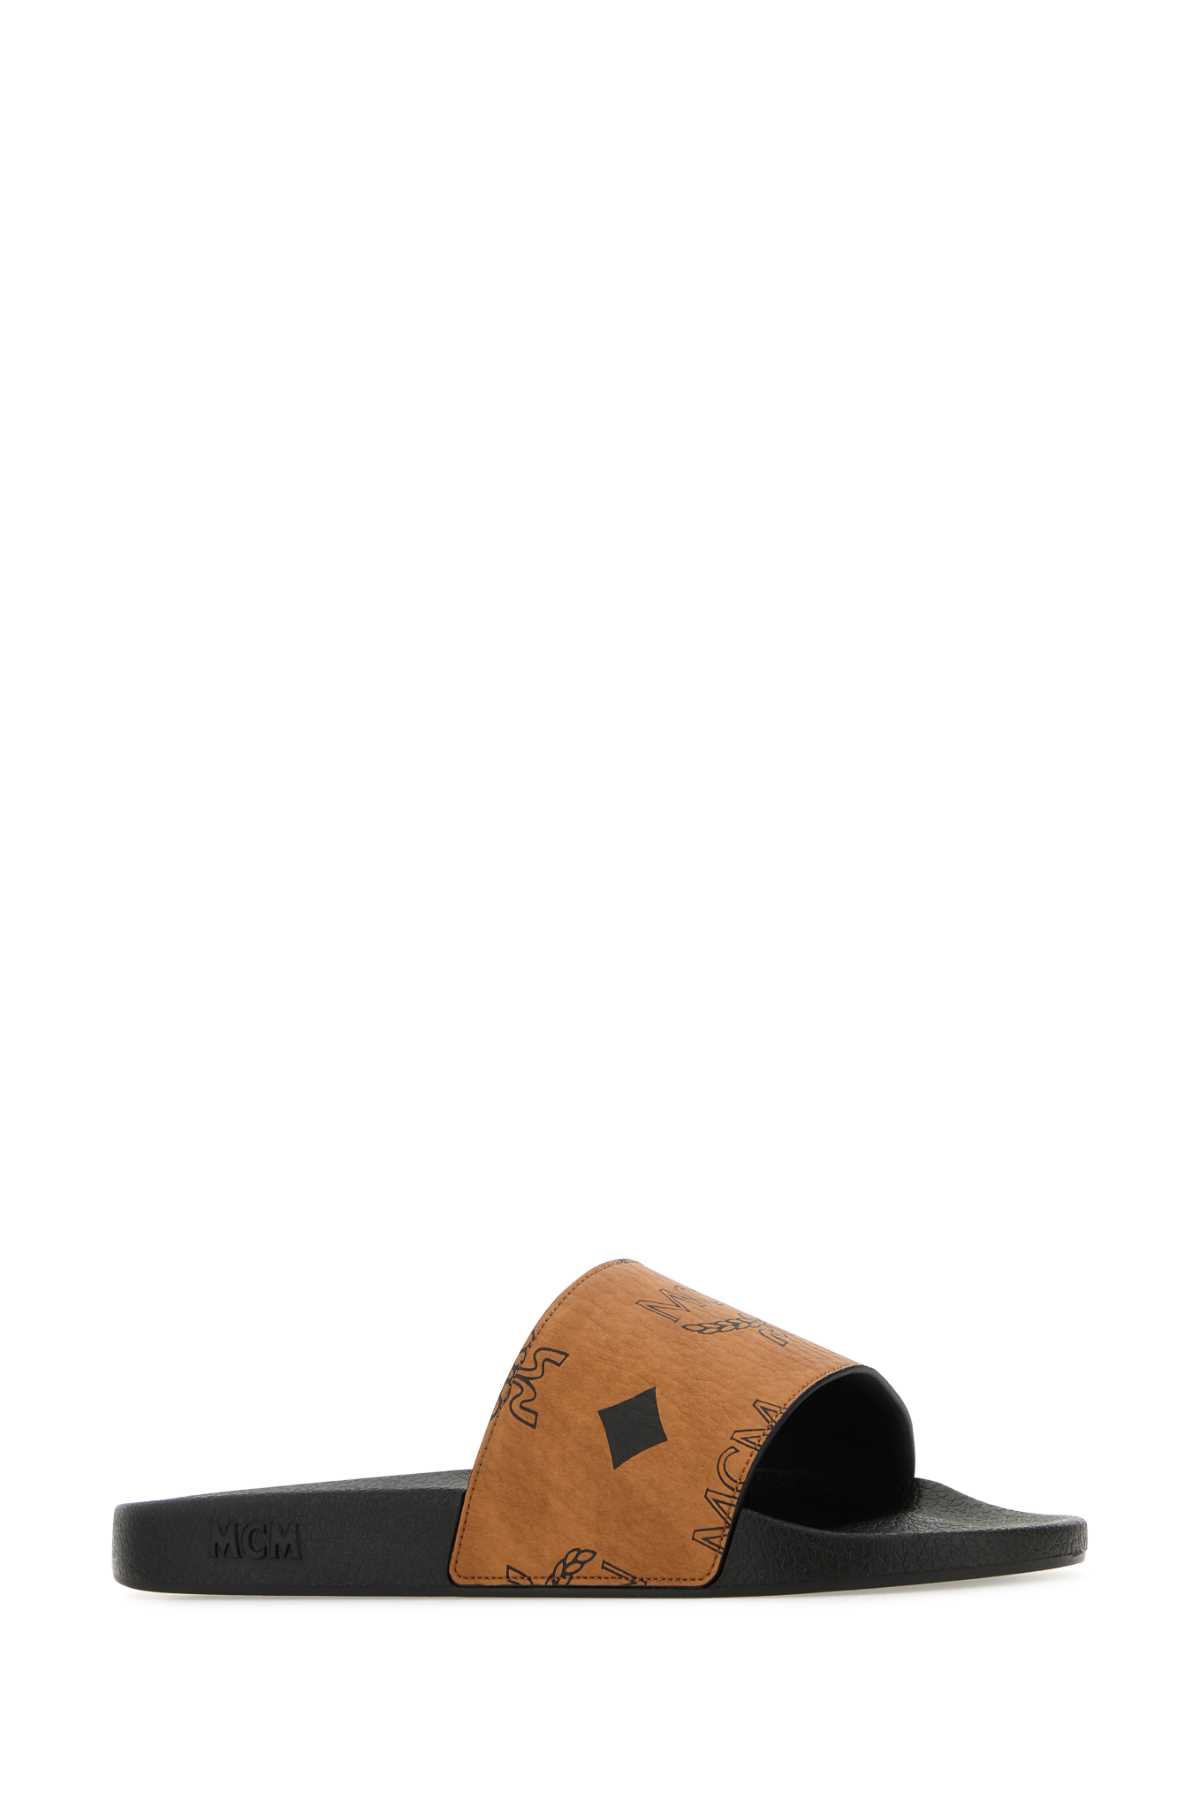 MCM PRINTED CANVAS SLIPPERS